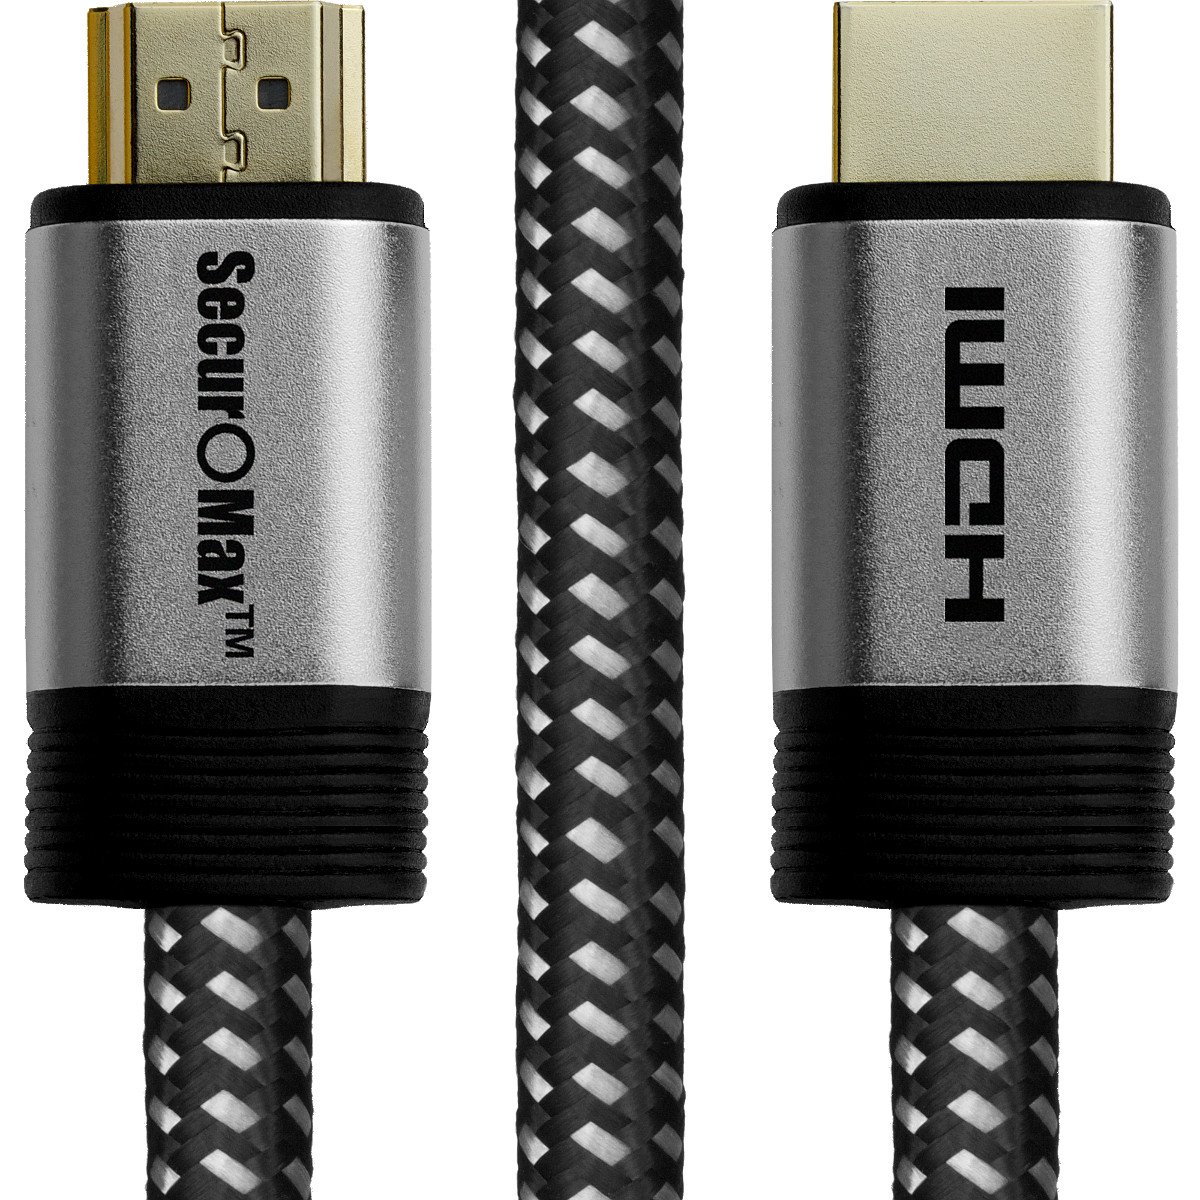 SecurOMax Copper Wired HDMI Extender Cable, 25-Foot